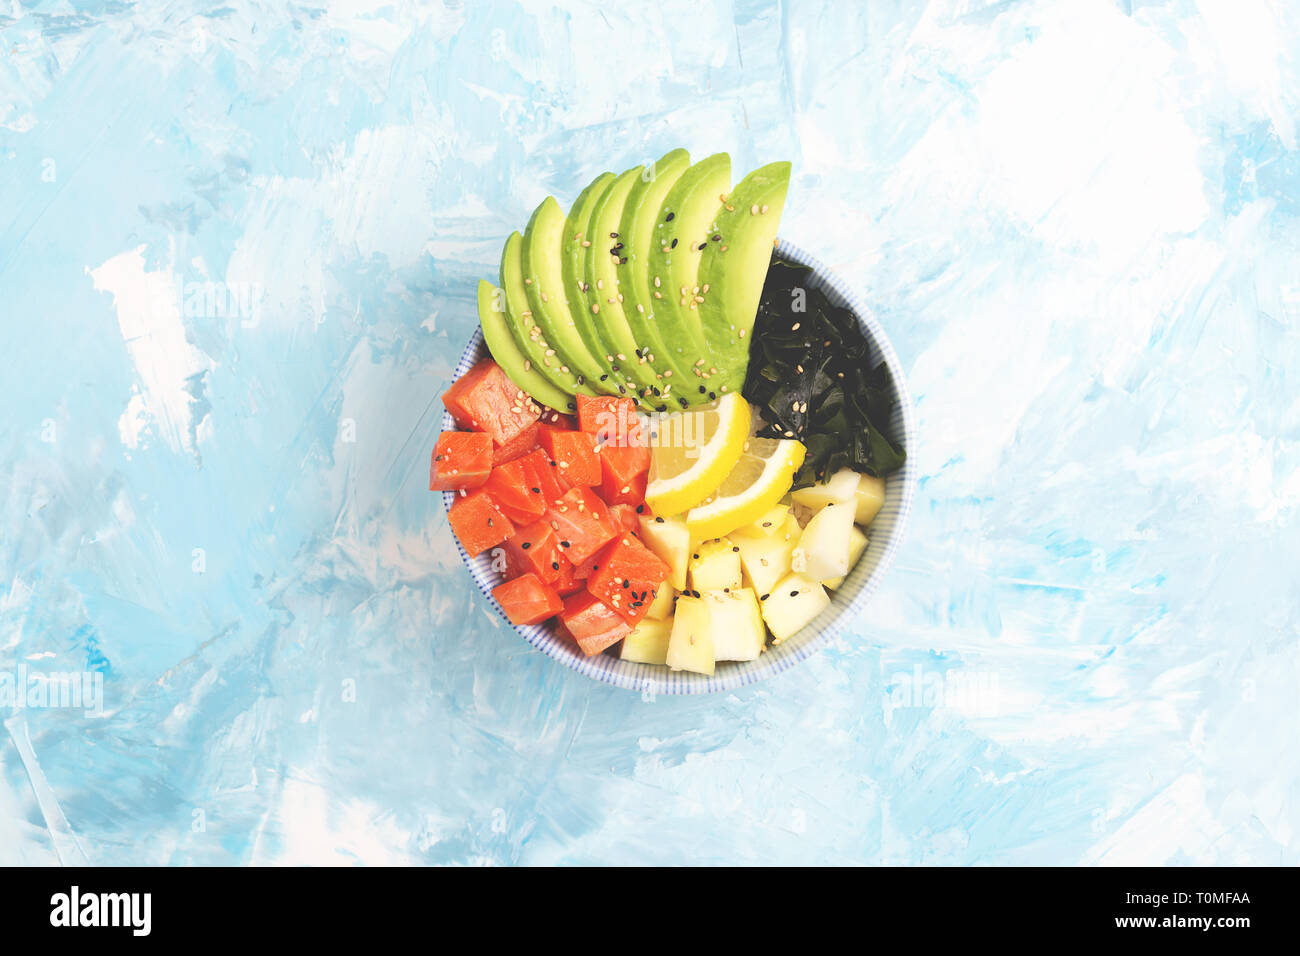 Hawaiian appetizer or main dish poke bowl on colorful background. Colorful food concept. Flat-lay, top view. Copy space for your text. Stock Photo